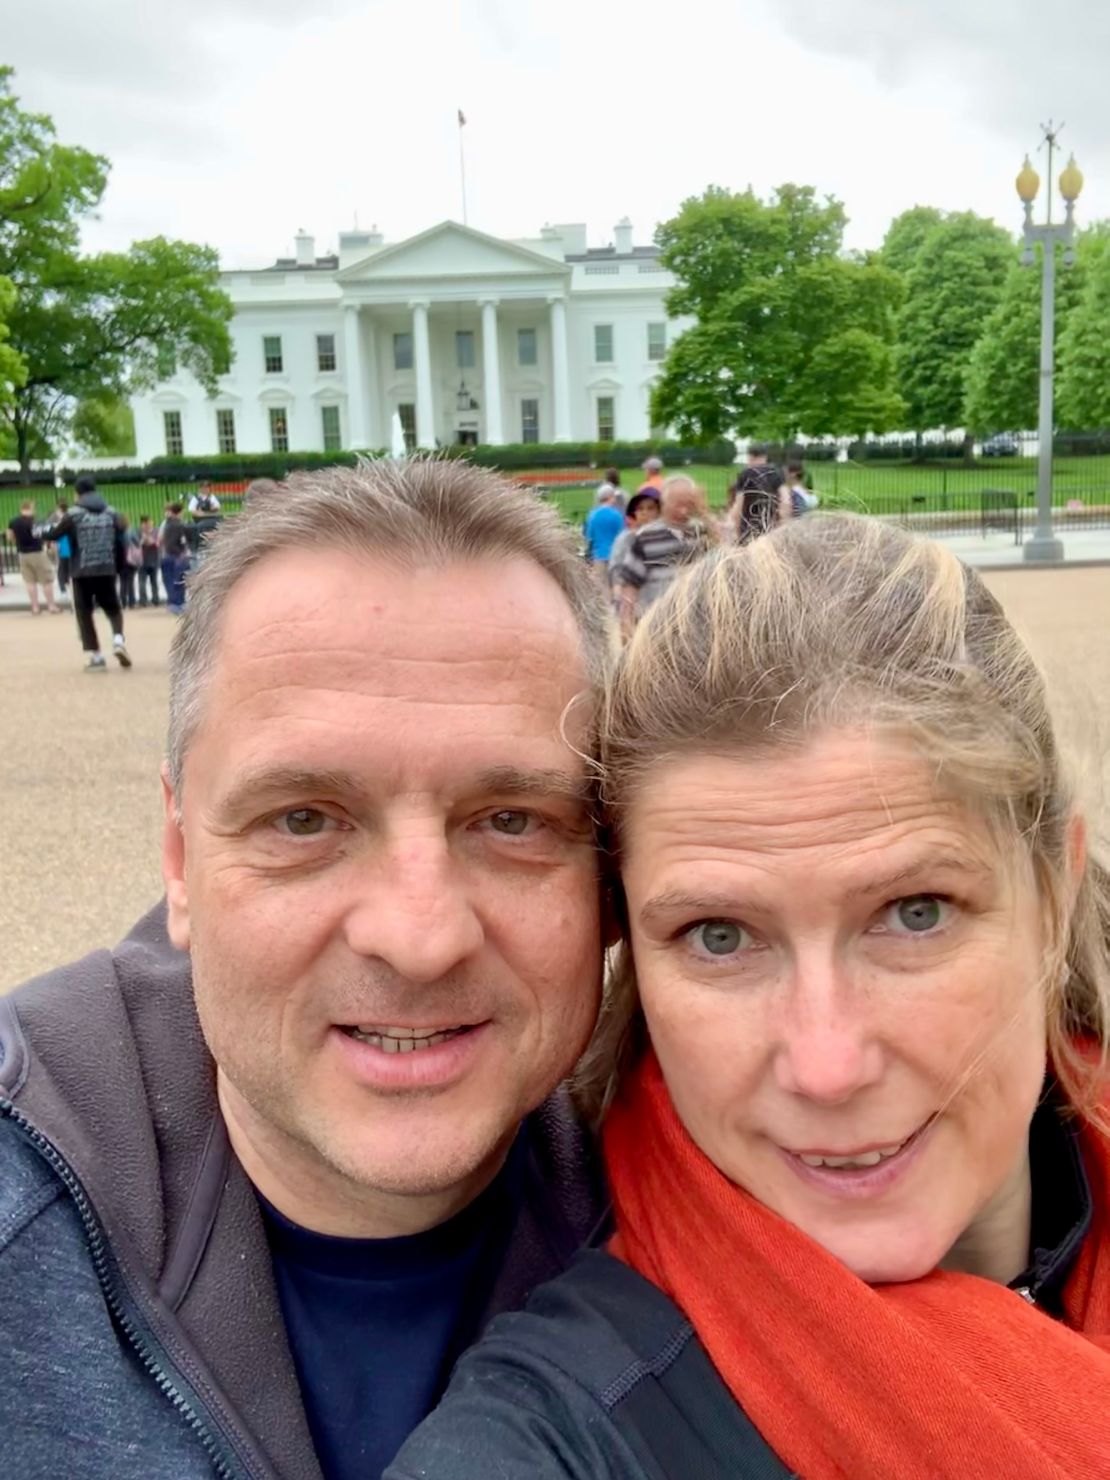 Andreas and Gabriele Sappok take a photo outside the White House in Washington, DC.